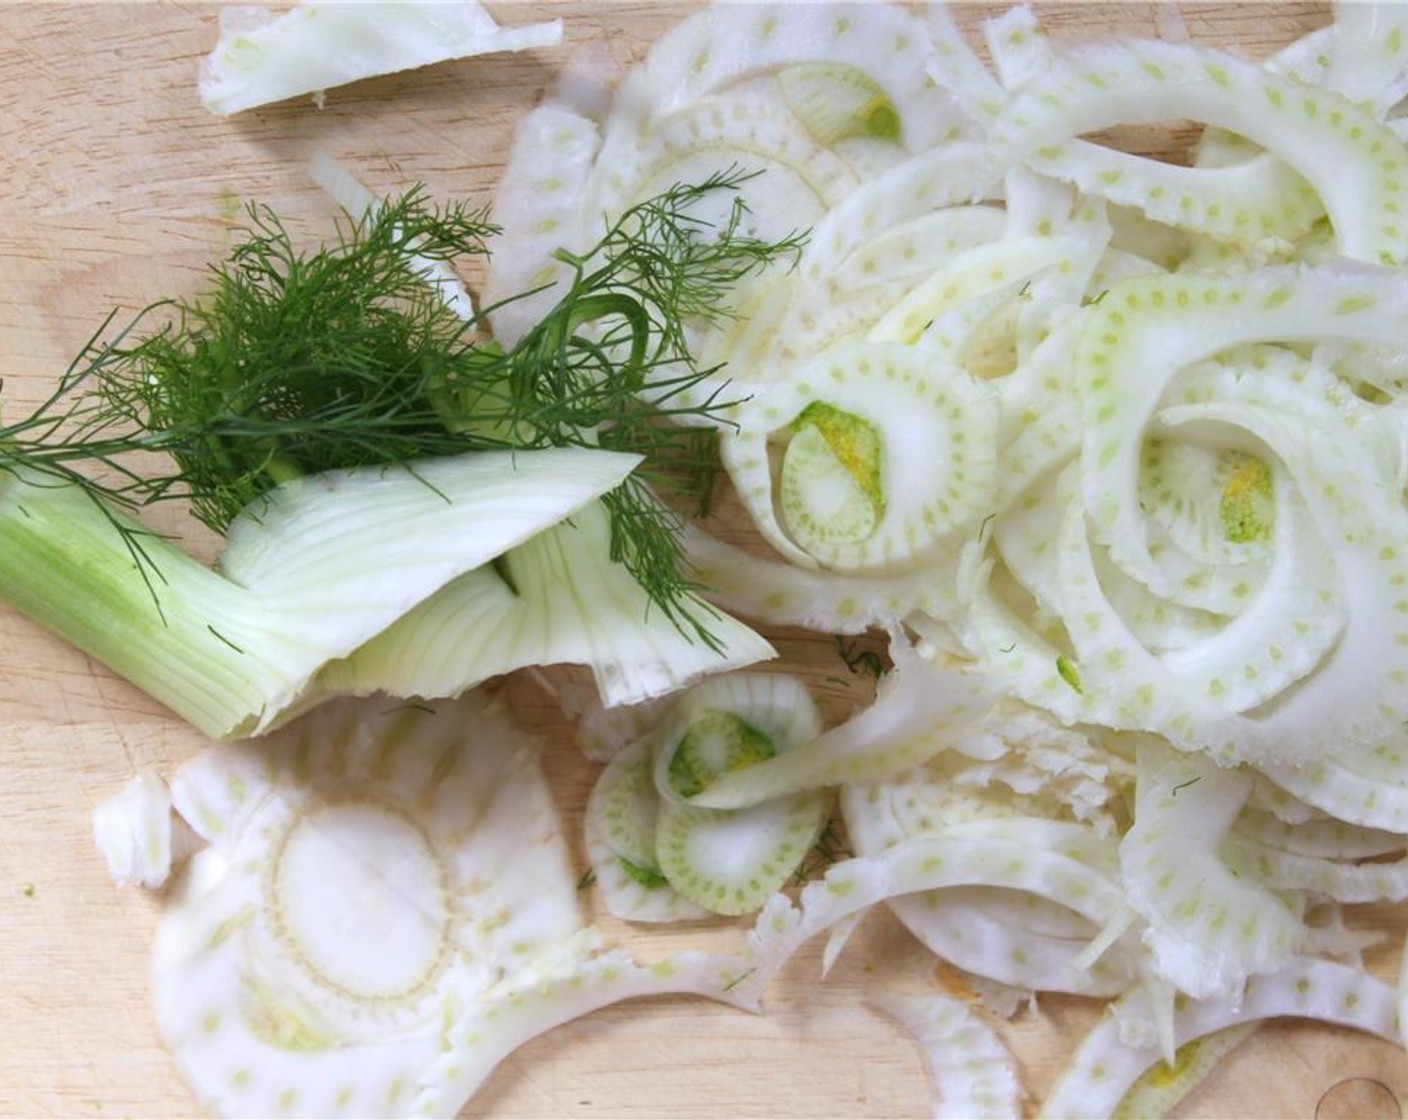 step 2 Meanwhile, remove the stalks from the Fennel Bulb (1). Shave the fennel bulb to the thickness you prefer-1/8 inch thickness or less for a delicate salad. Reserve the fennel leaves.